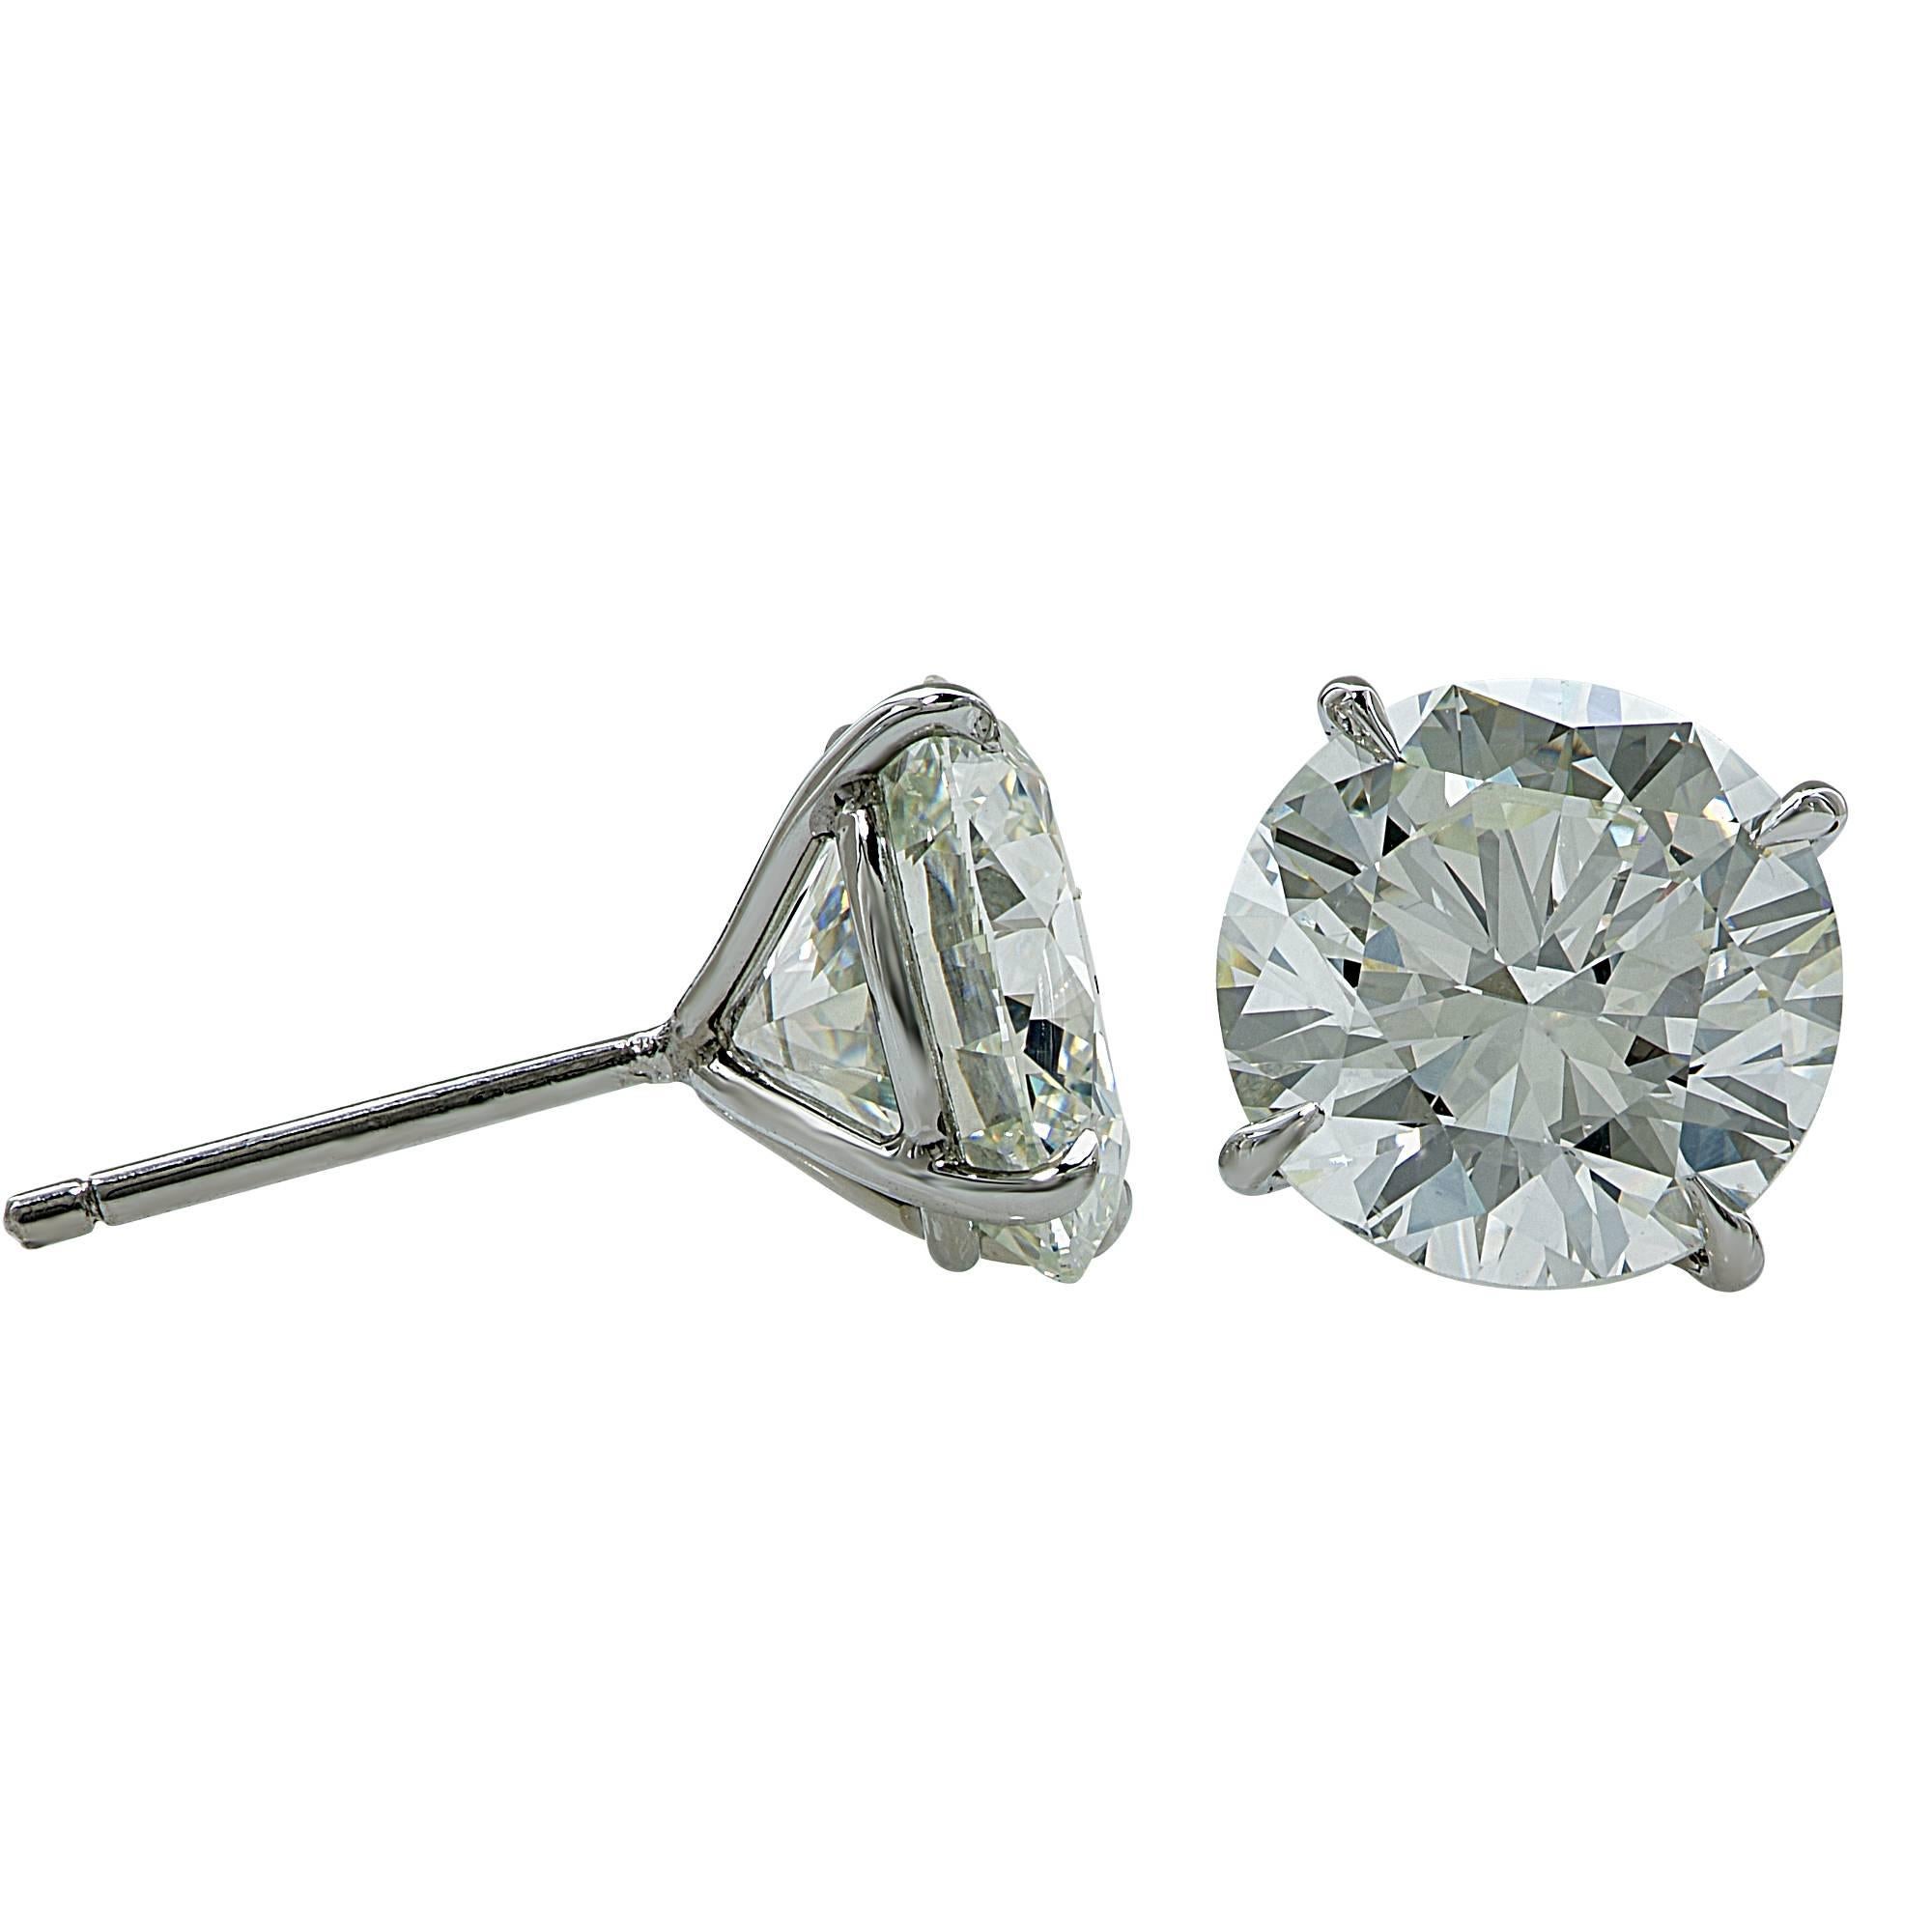 18k white gold stud earrings featuring 2 round brilliant cut diamonds weighing 6.03cts total, I-J color SI1 clarity. Both stones are GIA graded.

It is stamped and tested as 18k gold.
The metal weight is 1.58 grams.

These diamond earrings are